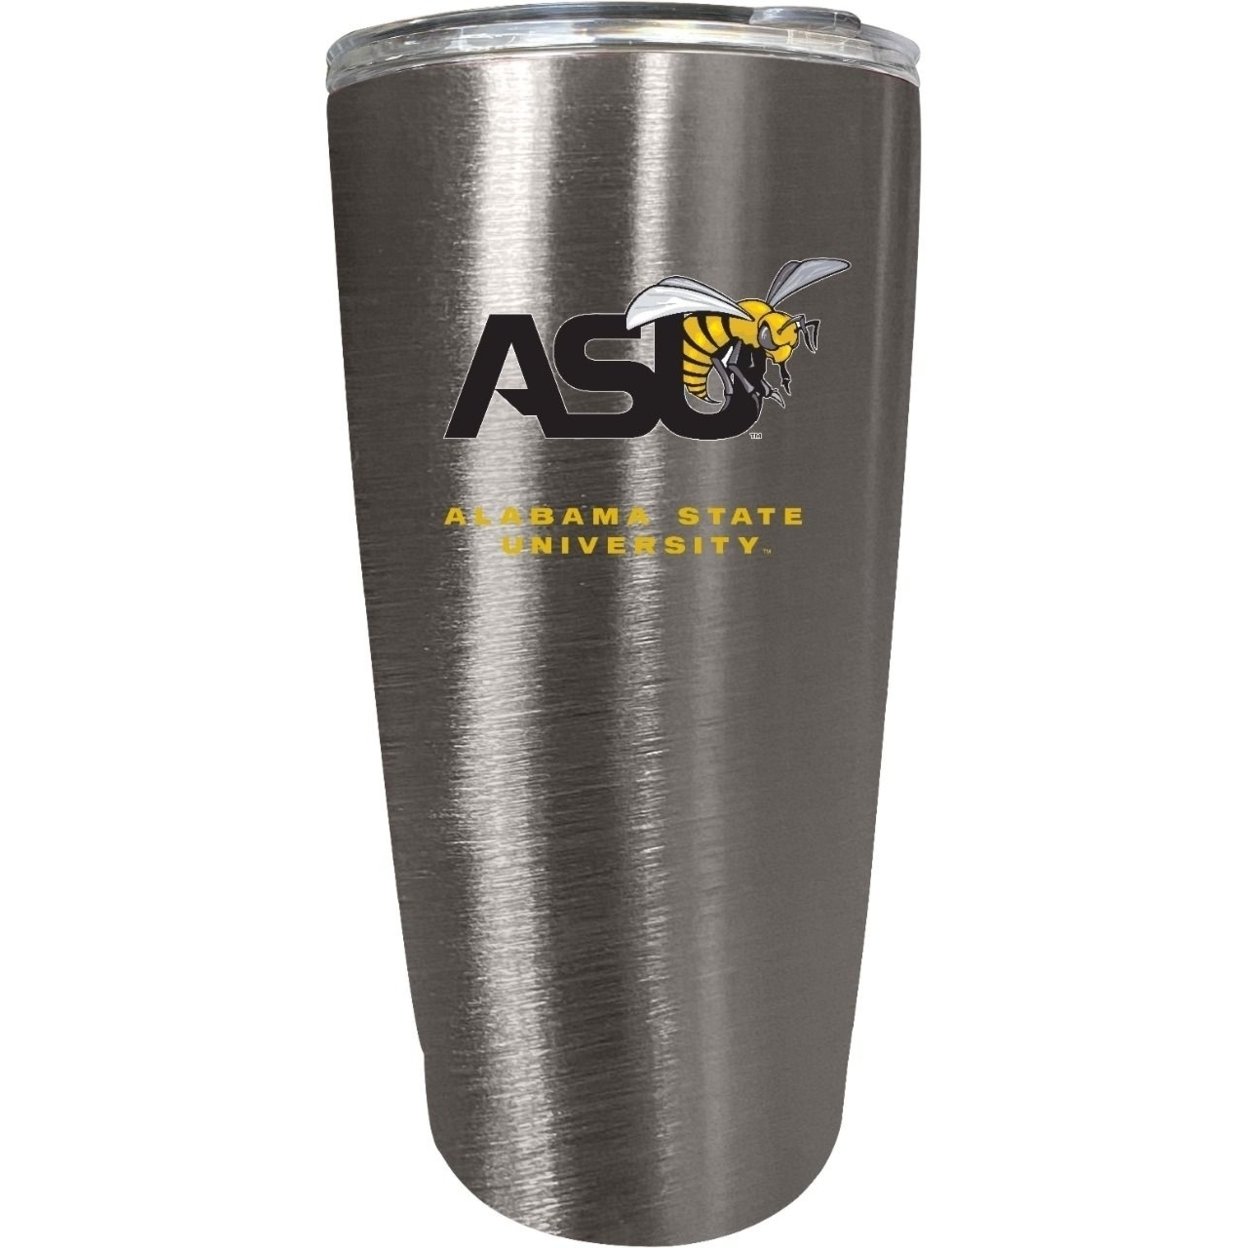 Alabama State University 16 Oz Insulated Stainless Steel Tumbler Colorless